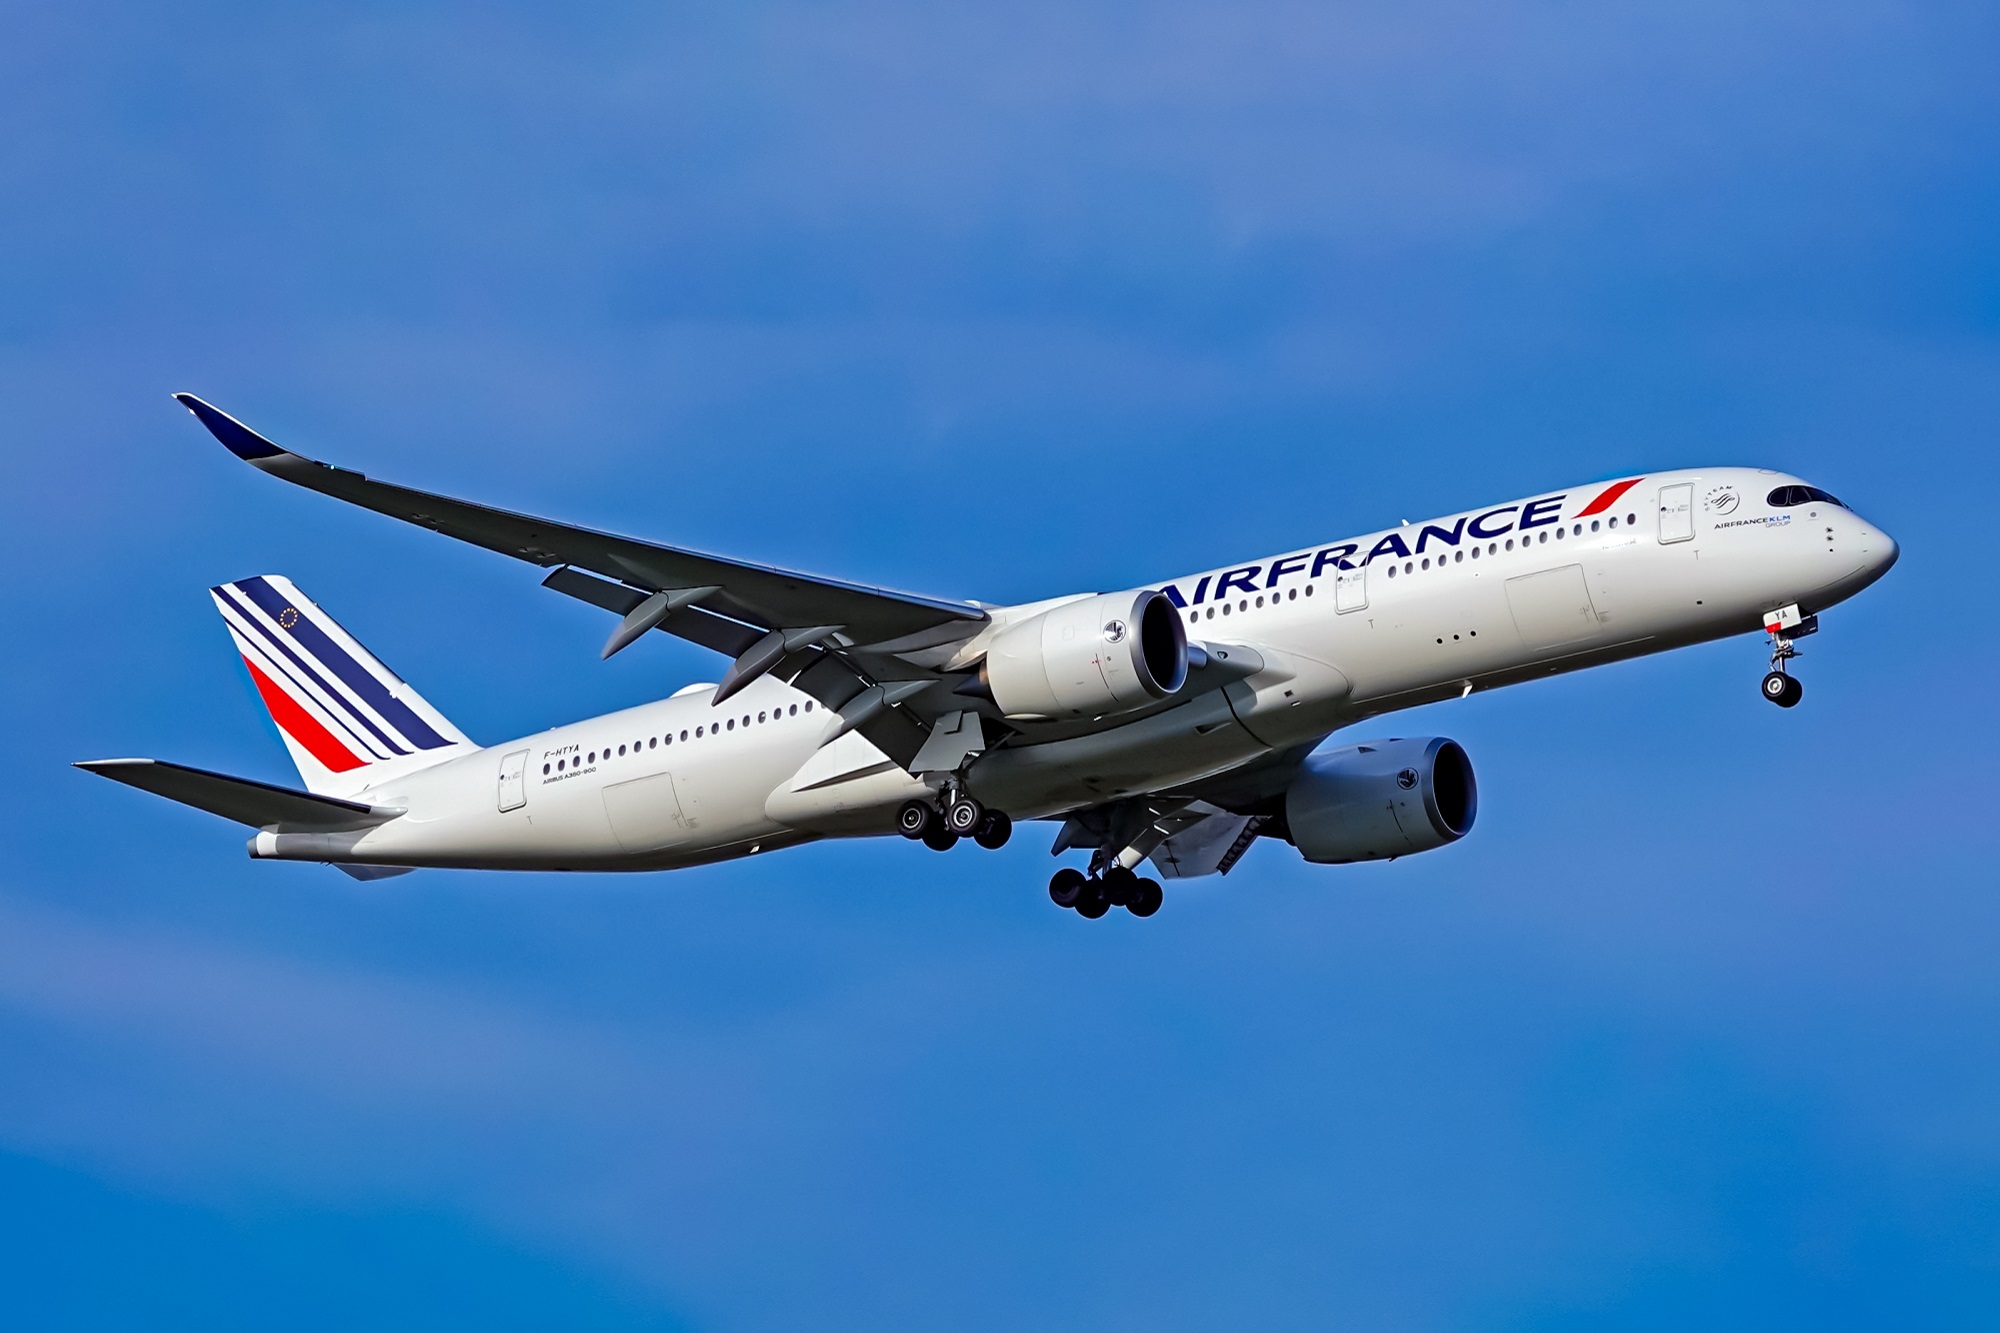 Air France Airbus A350 suffers tailstrike in Toronto